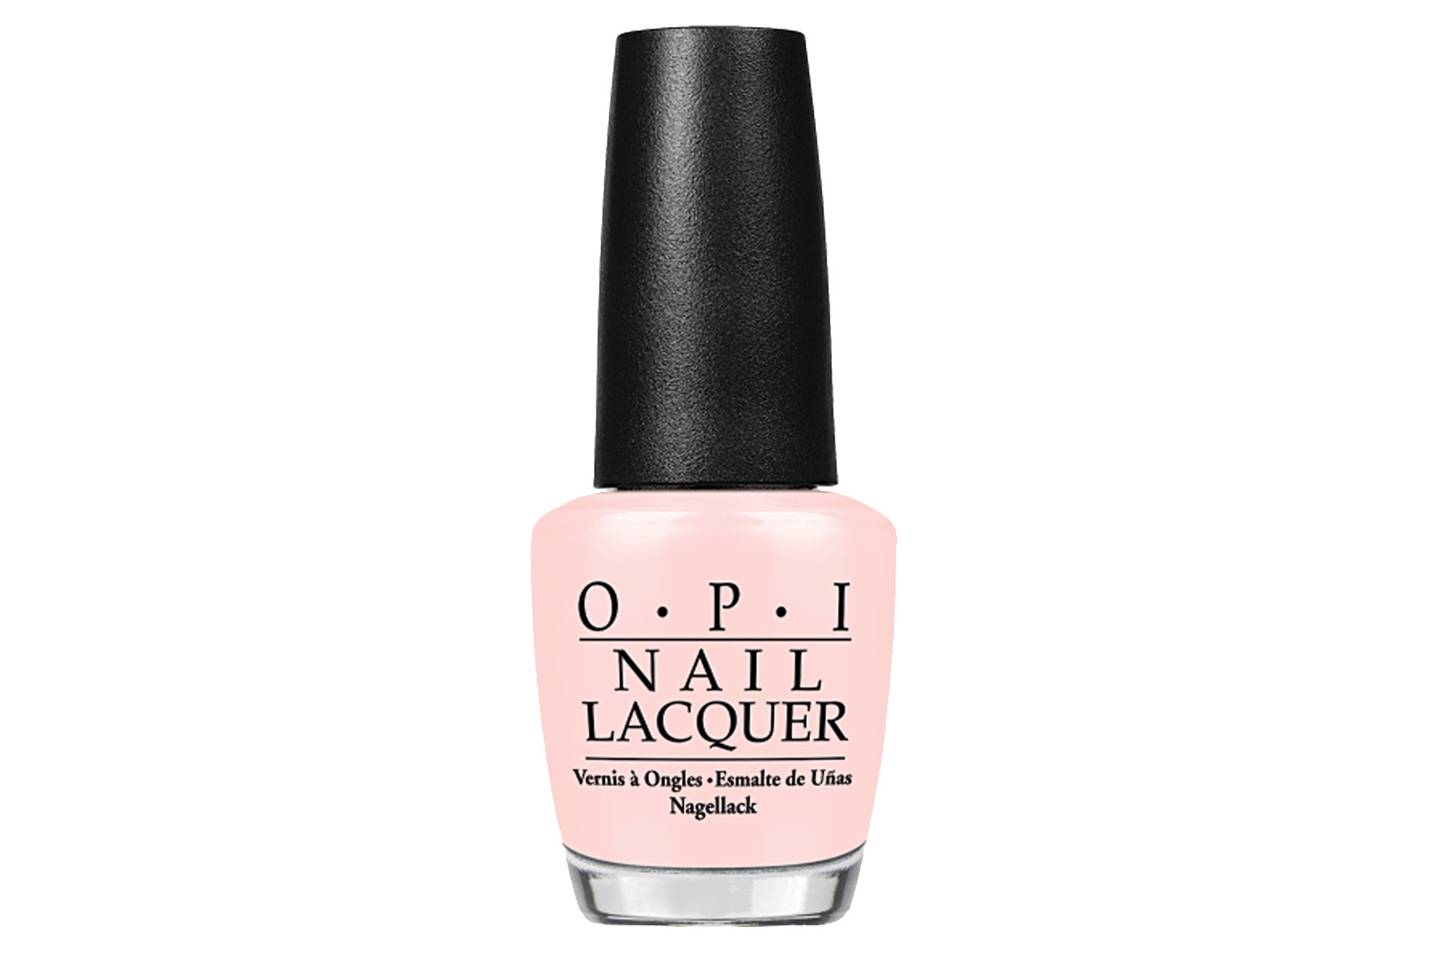 Opinions on the Best Pink Nail Polish Shades - wide 6